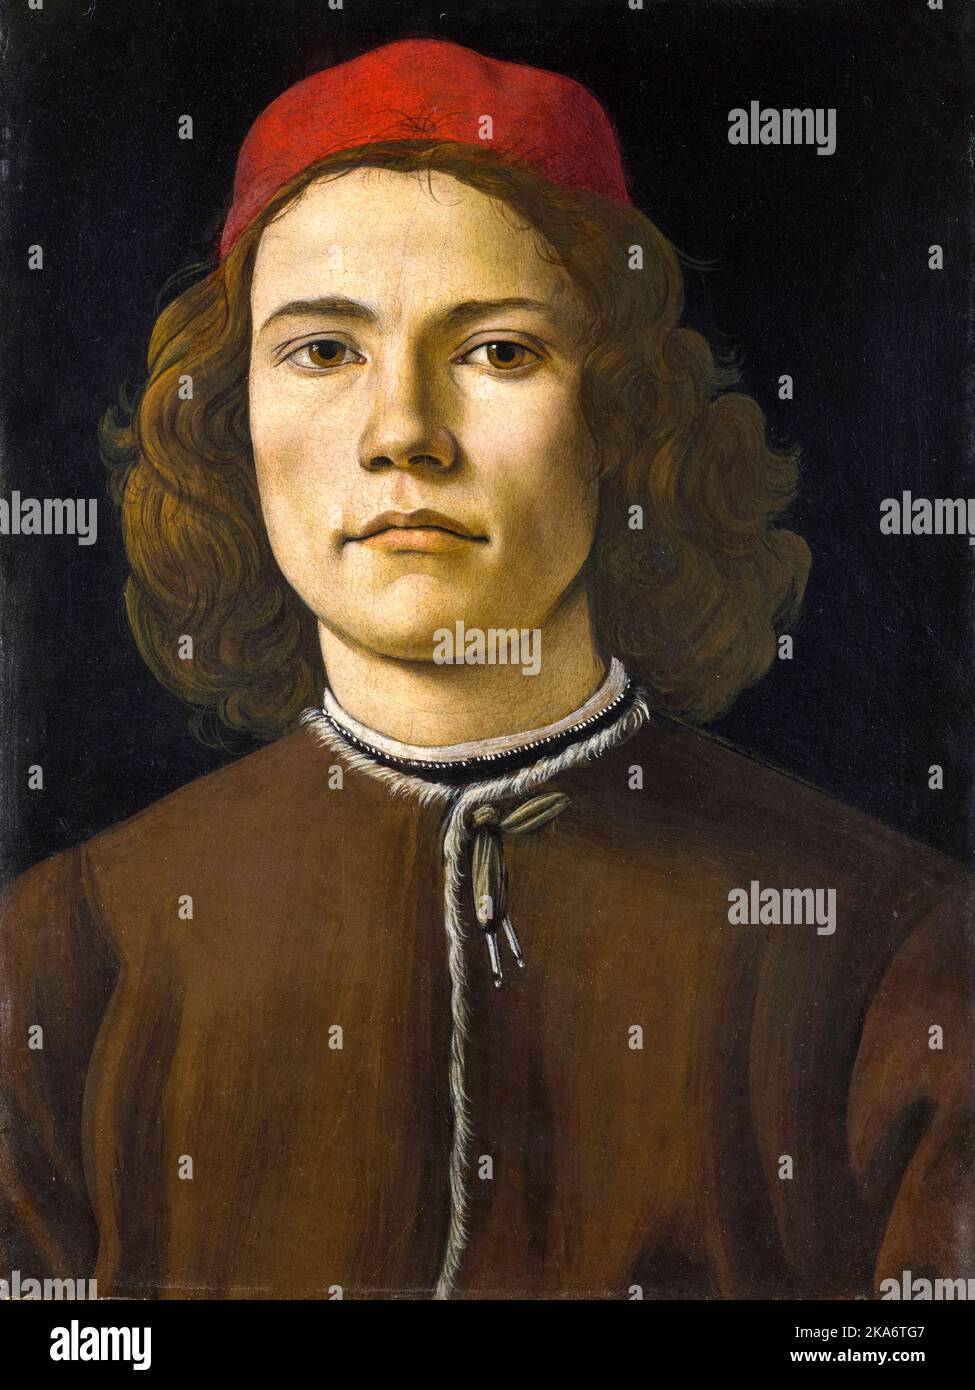 Sandro Botticelli, Portrait of a Young Man, painting in tempera and oil on wood, 1445-1510 Stock Photo